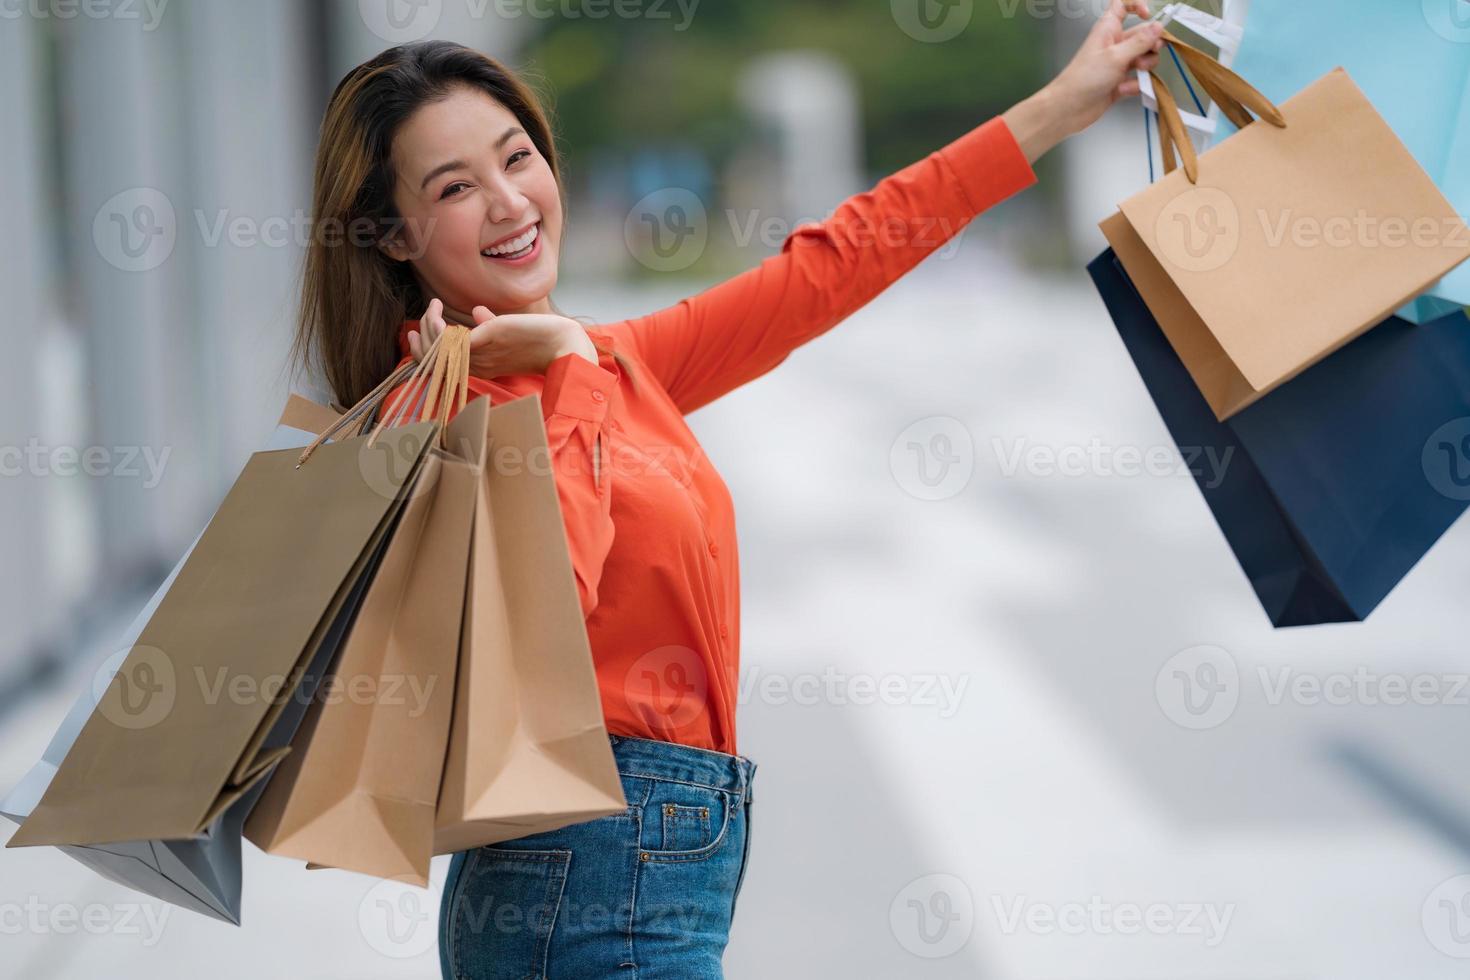 Outdoors portrait of Happy woman holding shopping bags photo